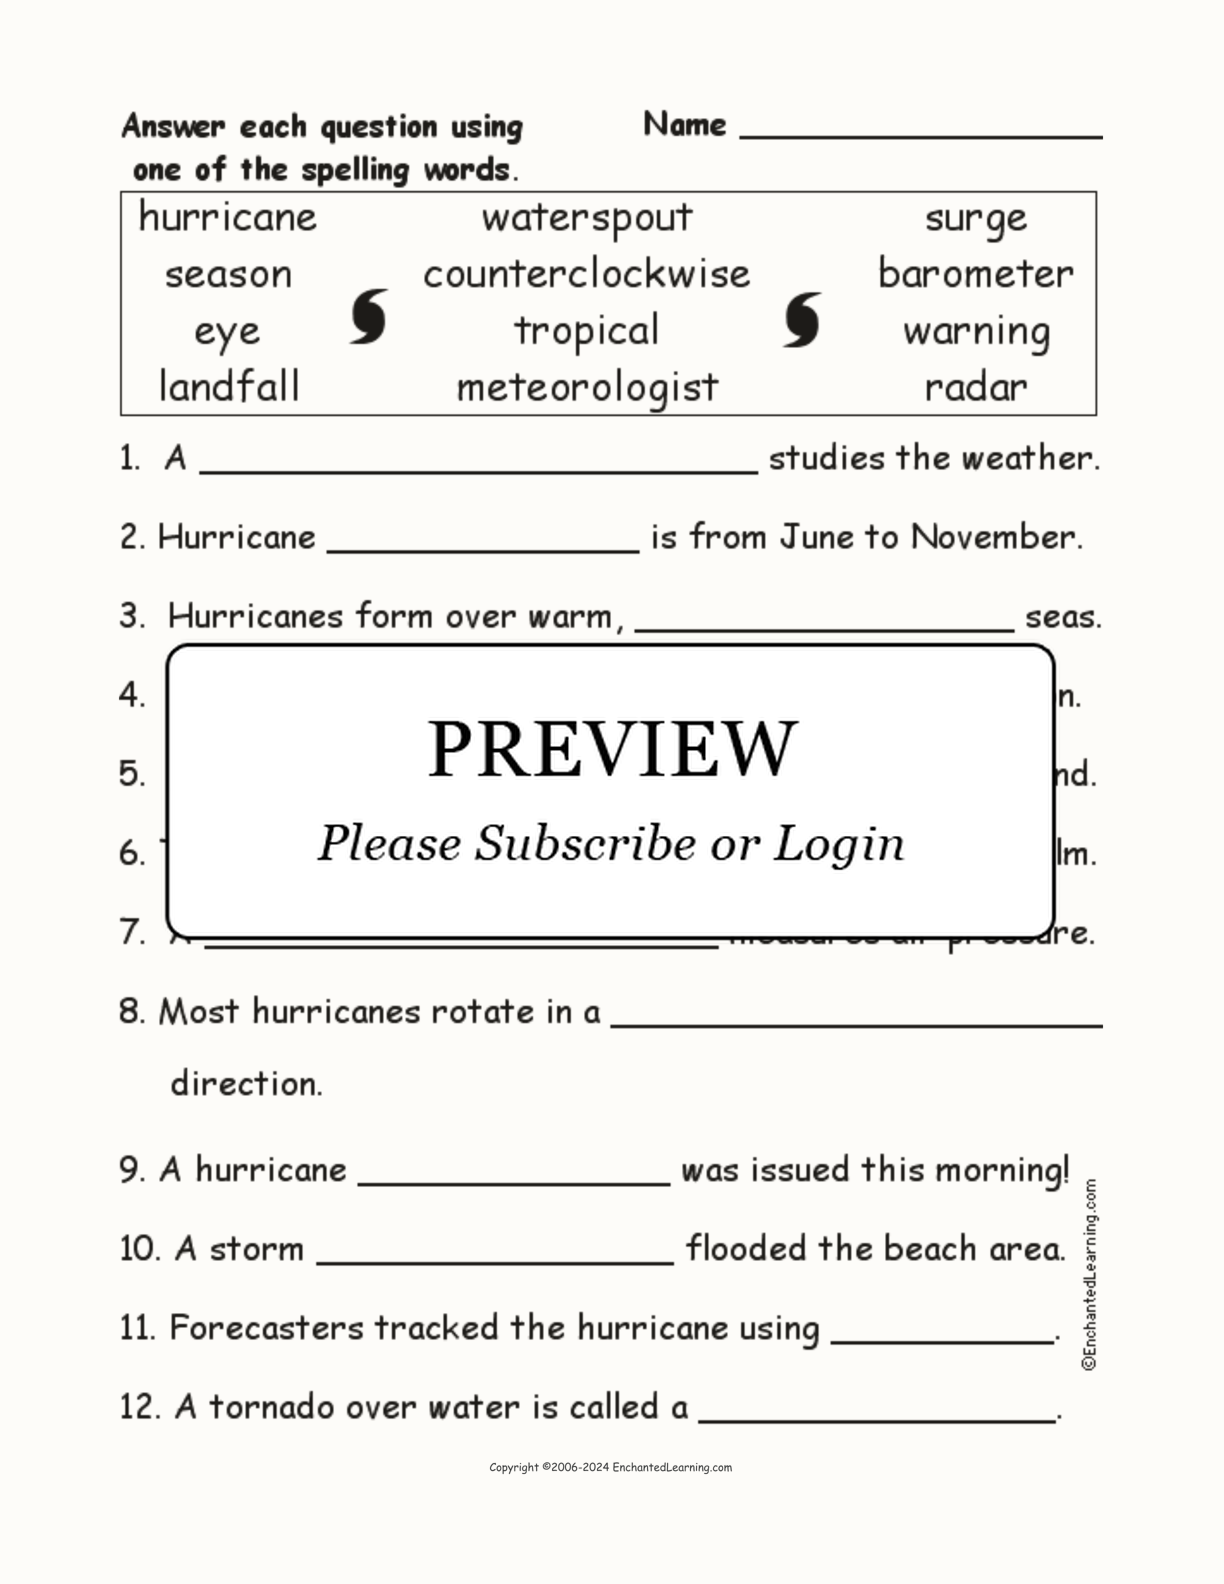 Hurricane Spelling Word Questions interactive worksheet page 1